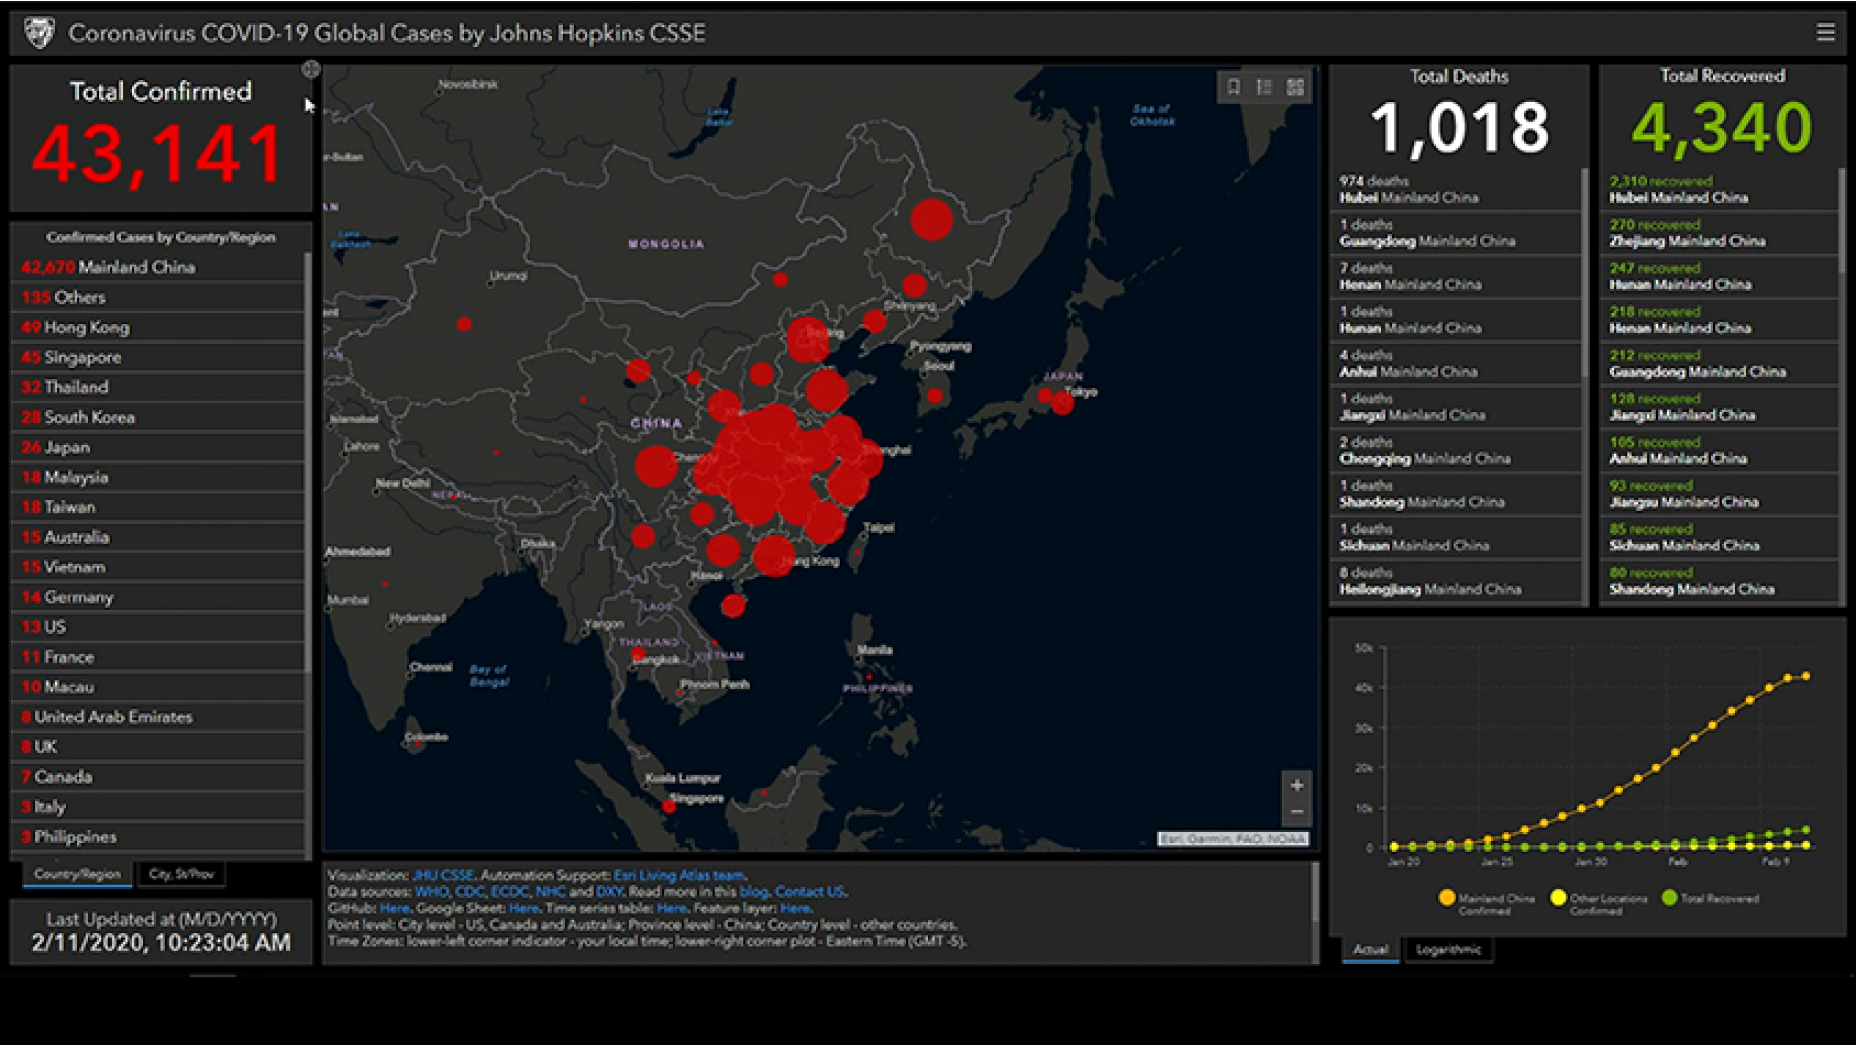 John Hopkins University dashboard of the coronavirus outbreak with a gray map and red circles indicating confirmed cases